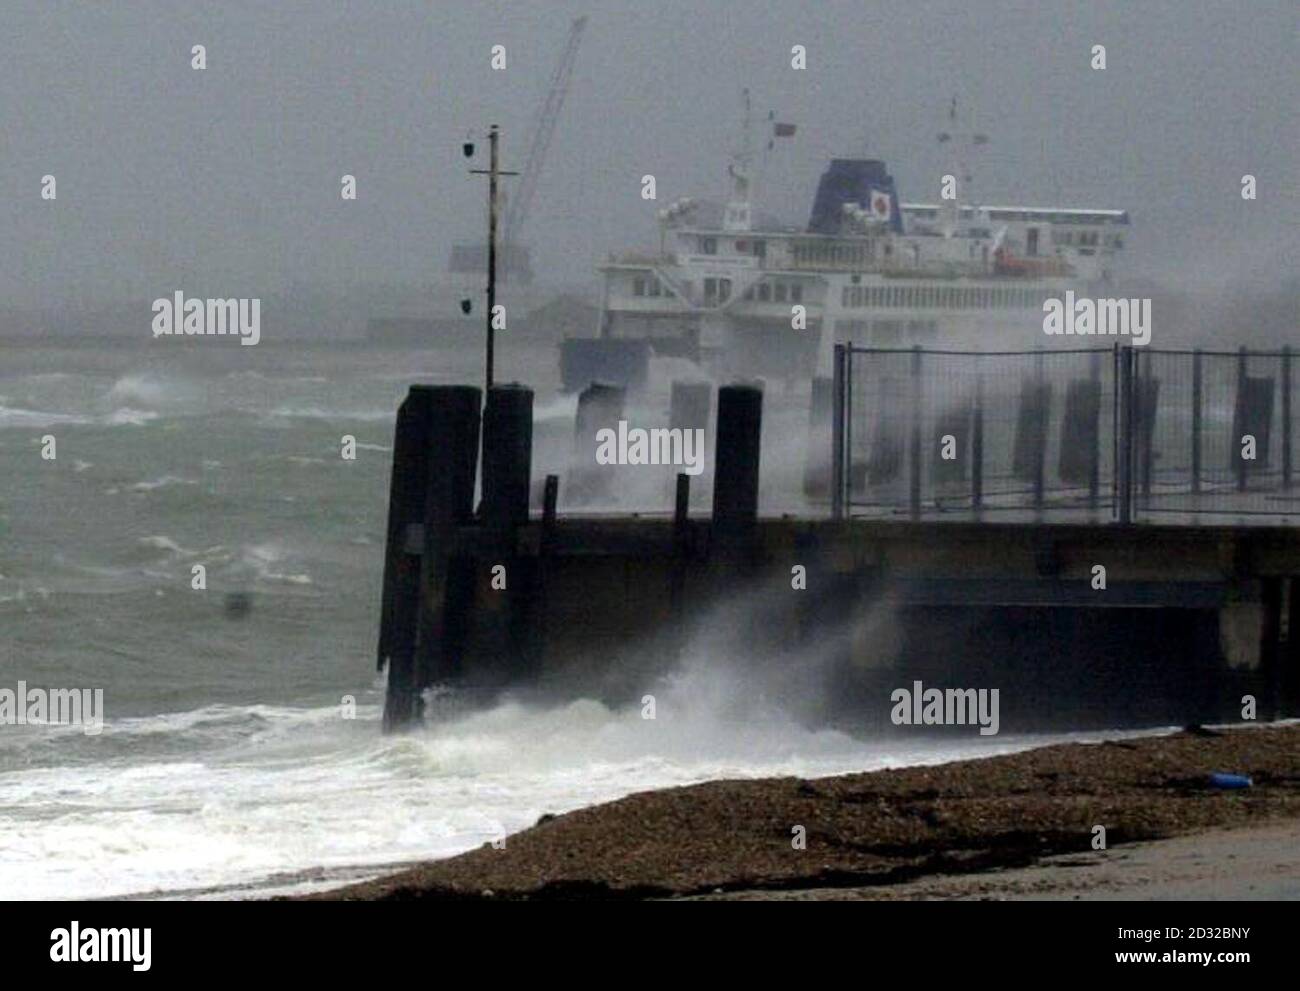 Waves lash the sea-front at Southsea, Portsmouth. Fierce winds lashed the west and south coasts today as gales and rain roared in. Weathermen reported gusts up to 50mph and warned it would get windier before the storms blew themselves out. Stock Photo